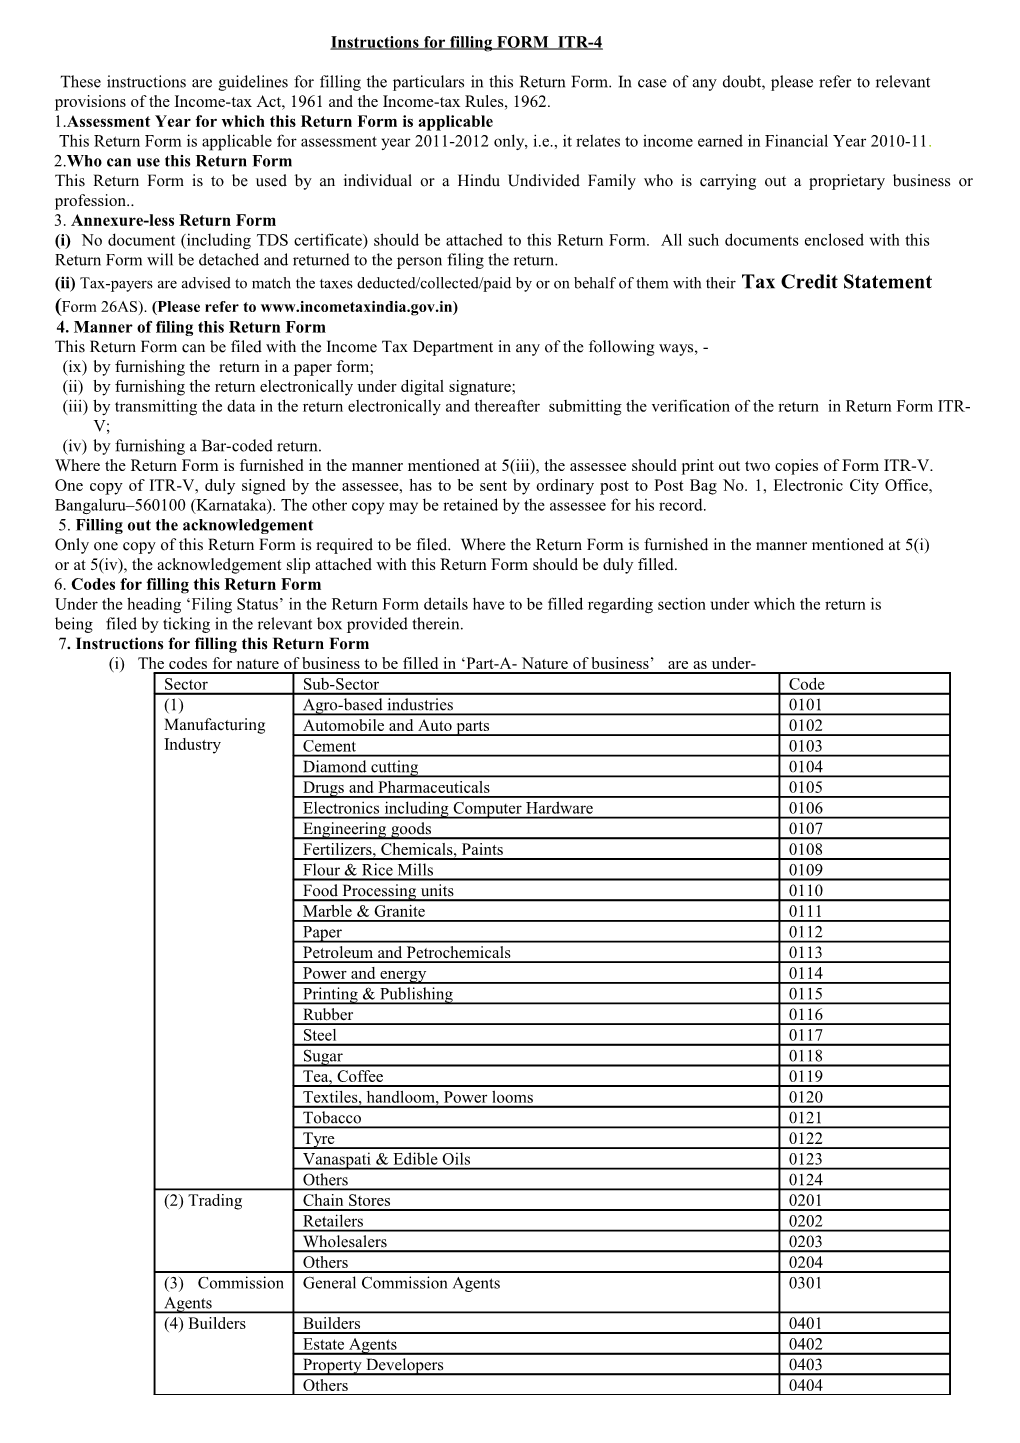 Instructions for Filling FORM ITR-4